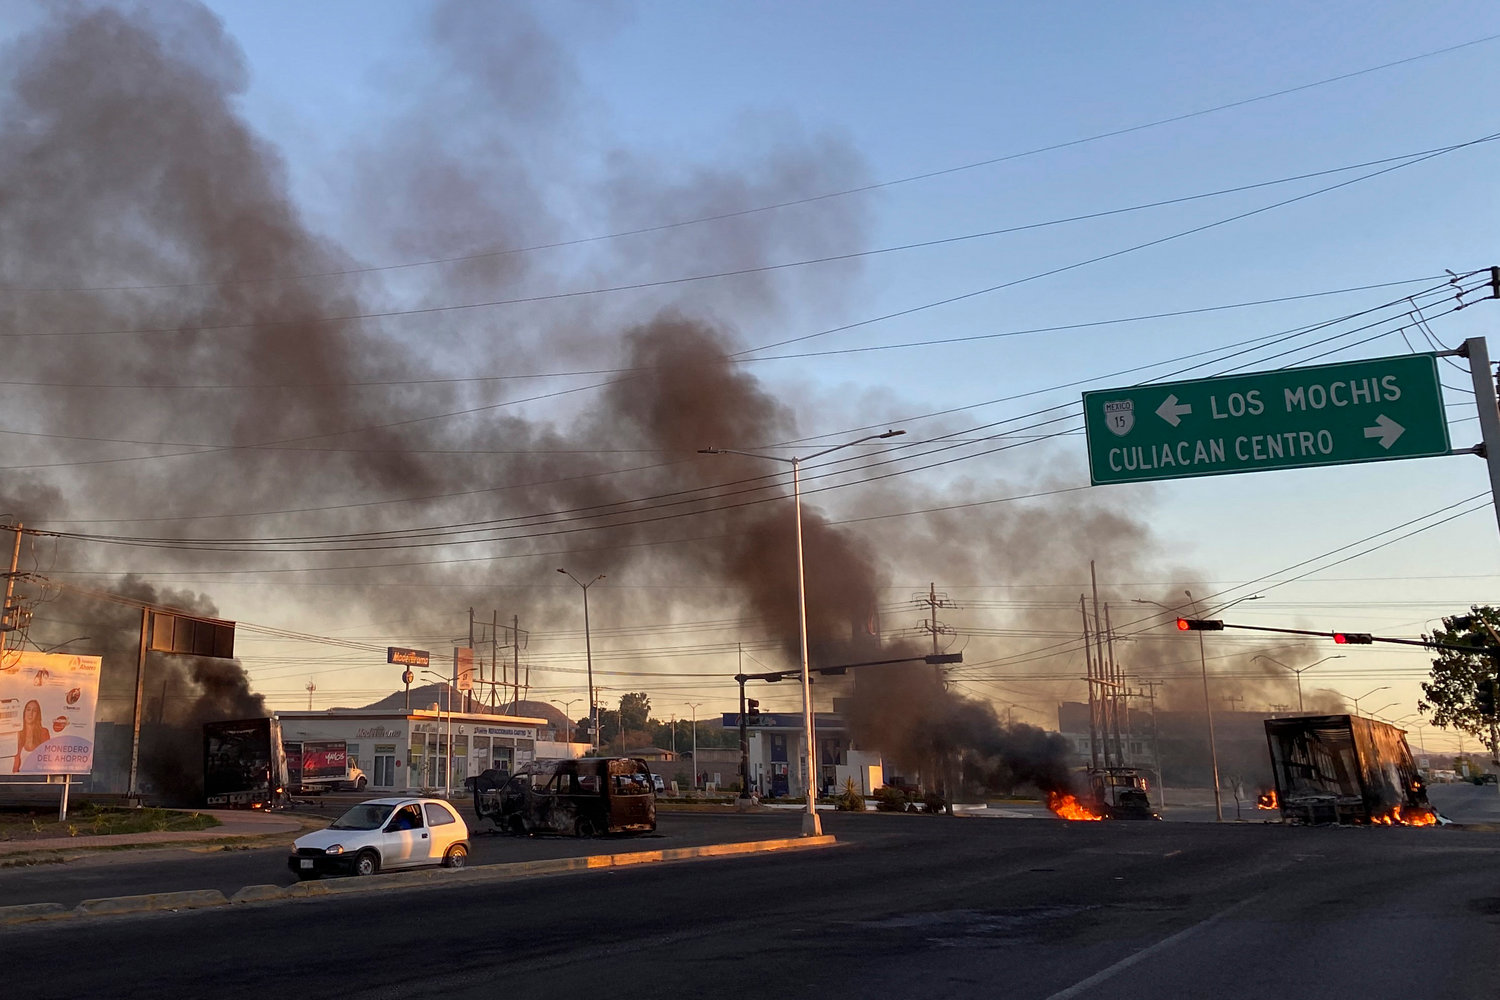 Burning vehicles are seen in the street during an operation to arrest the son of Joaquin "El Chapo" Guzman, Ovidio Guzman, in Culiacan, Sinaloa state, Mexico, on Thursday, Jan. 5, 2023. (Marcos Vizcarra/AFP/Getty Images/TNS)